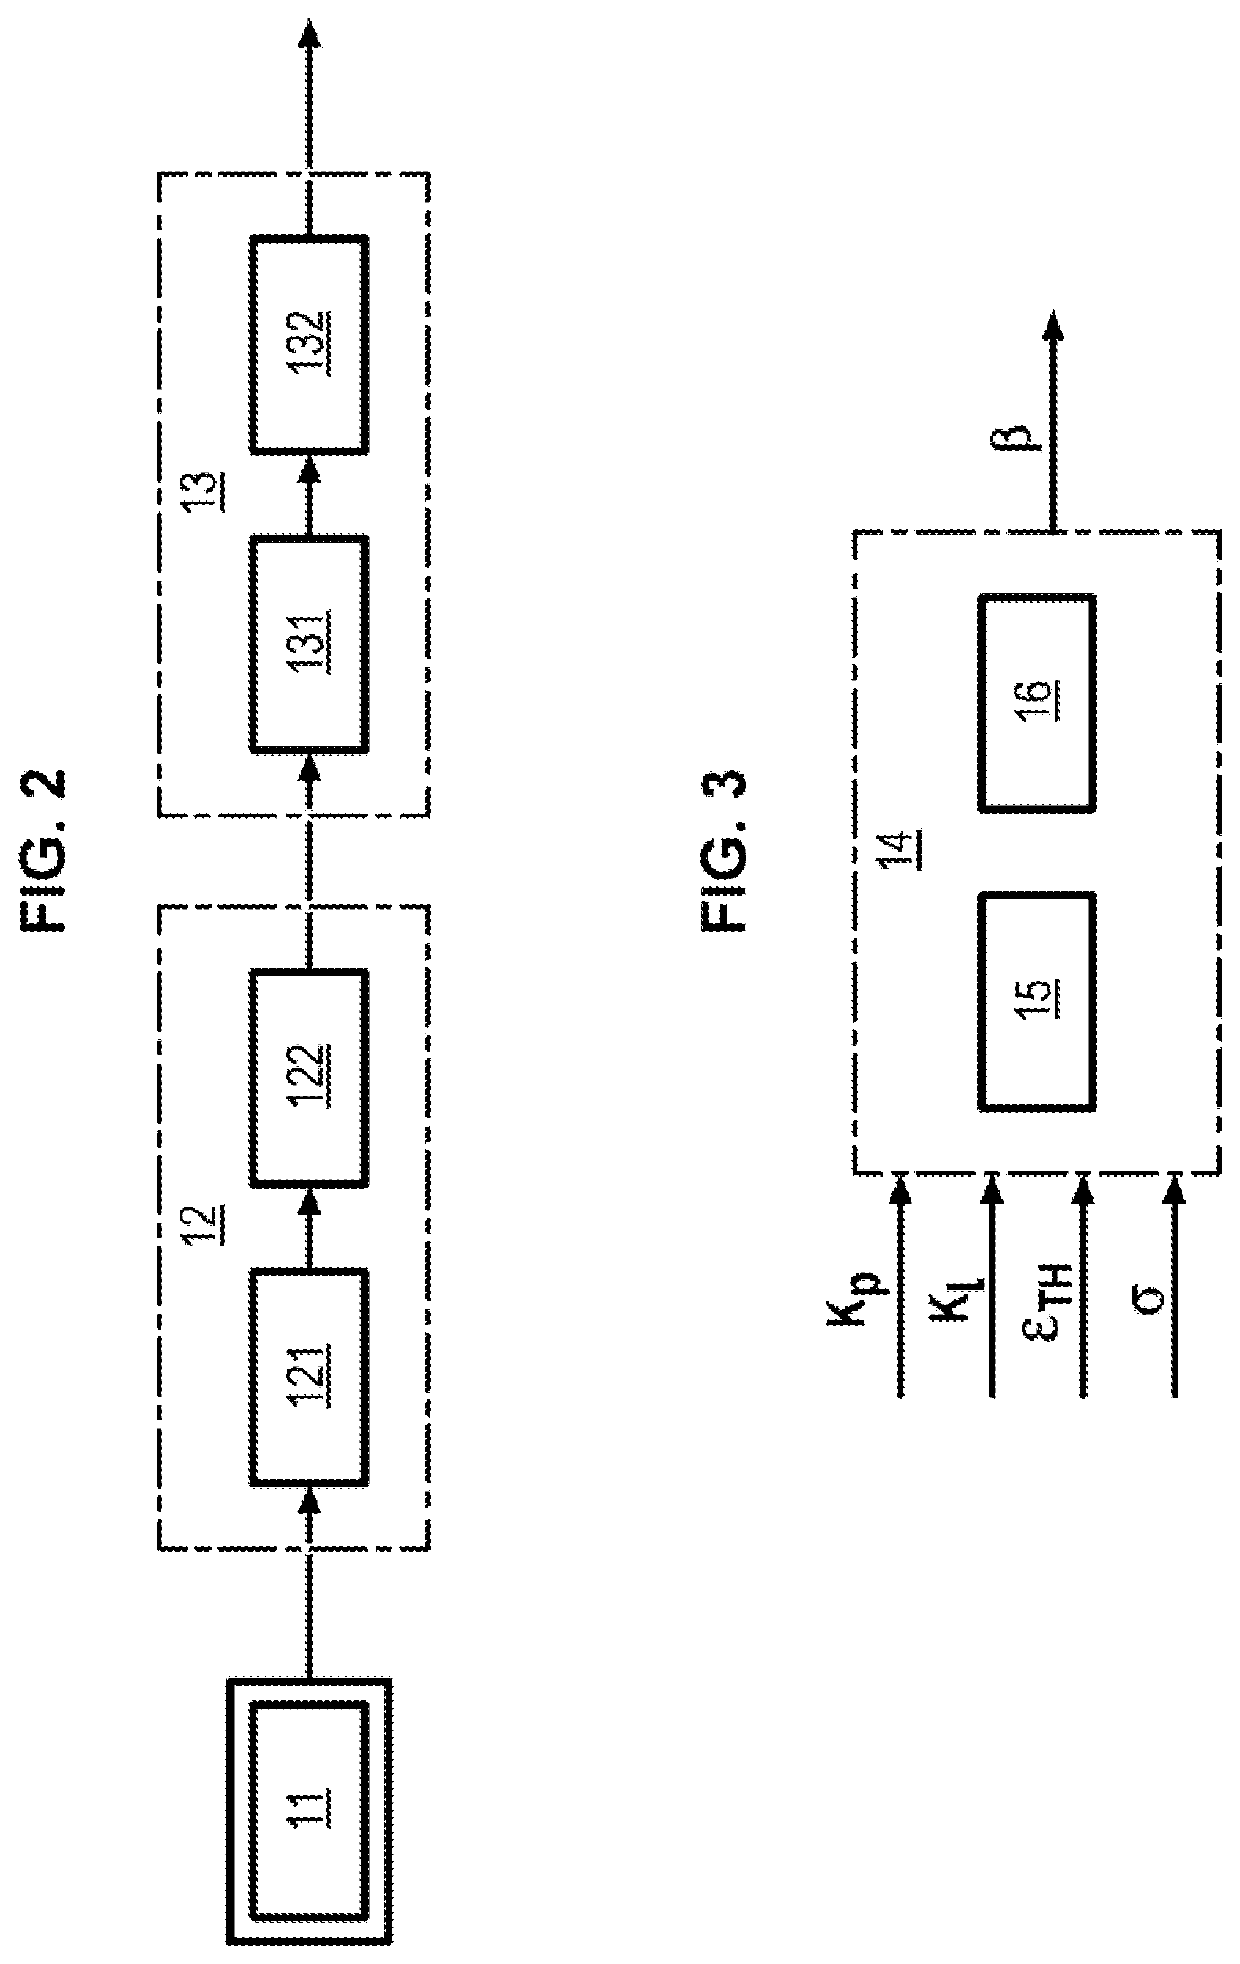 Method of setting a controller with setpoint weighting